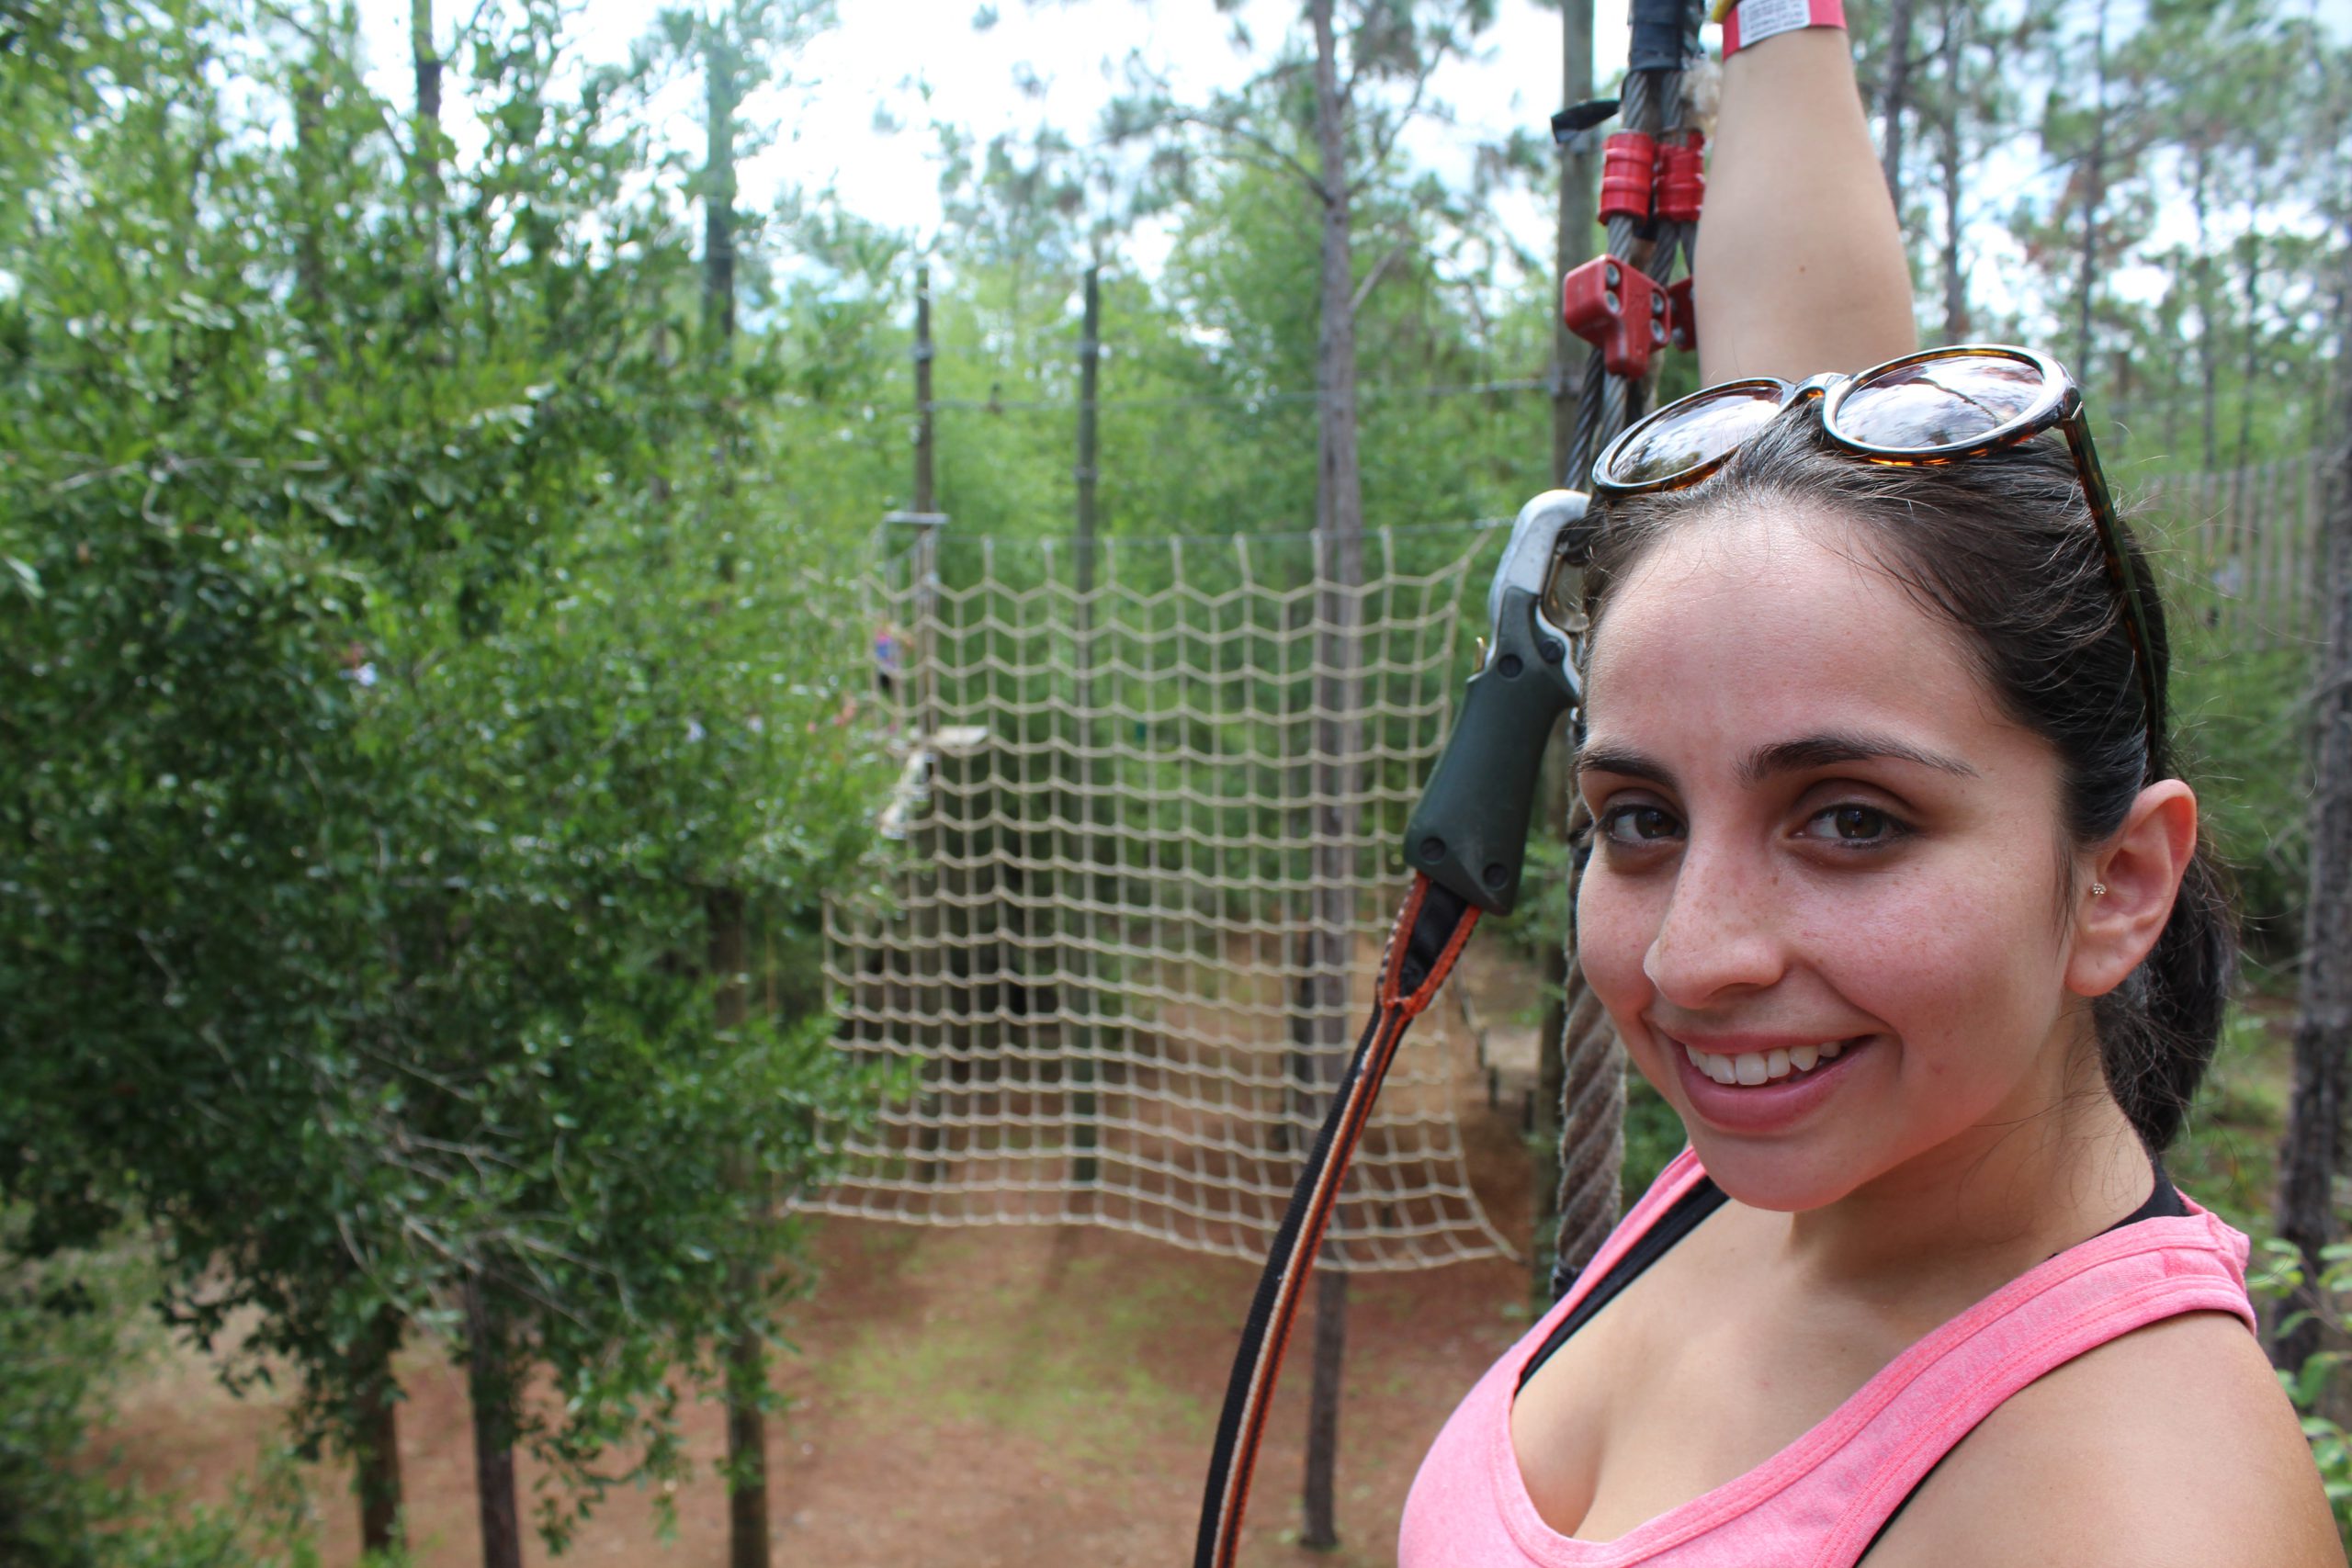 Guest smiling while climbing the ropes course at Orlando Tree Trek.